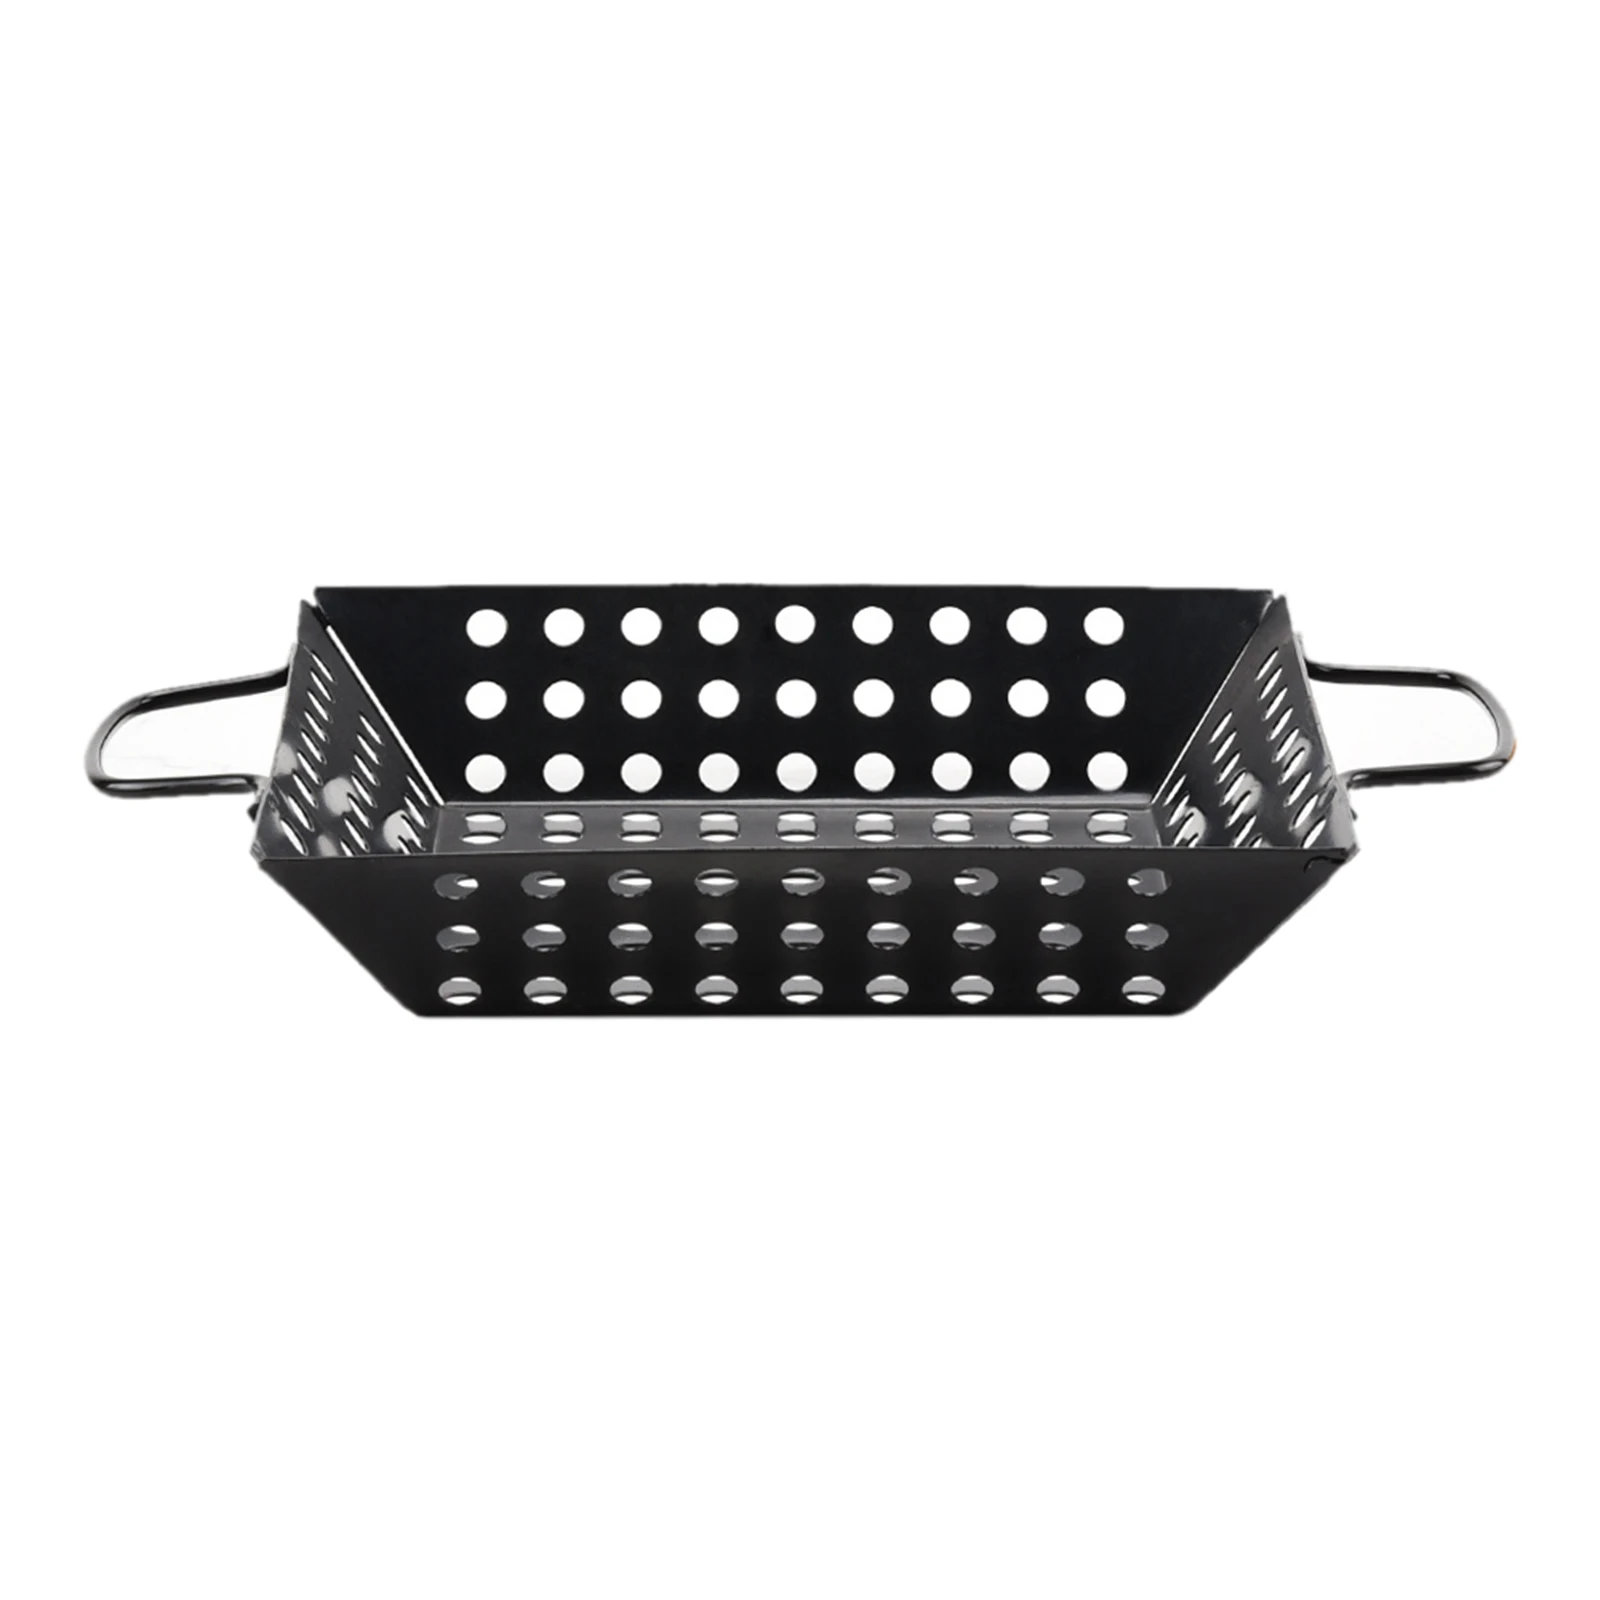 Non-Stick BBQ Pans Grill Topper Basket Wok Picnic Camping Cooking Seafood